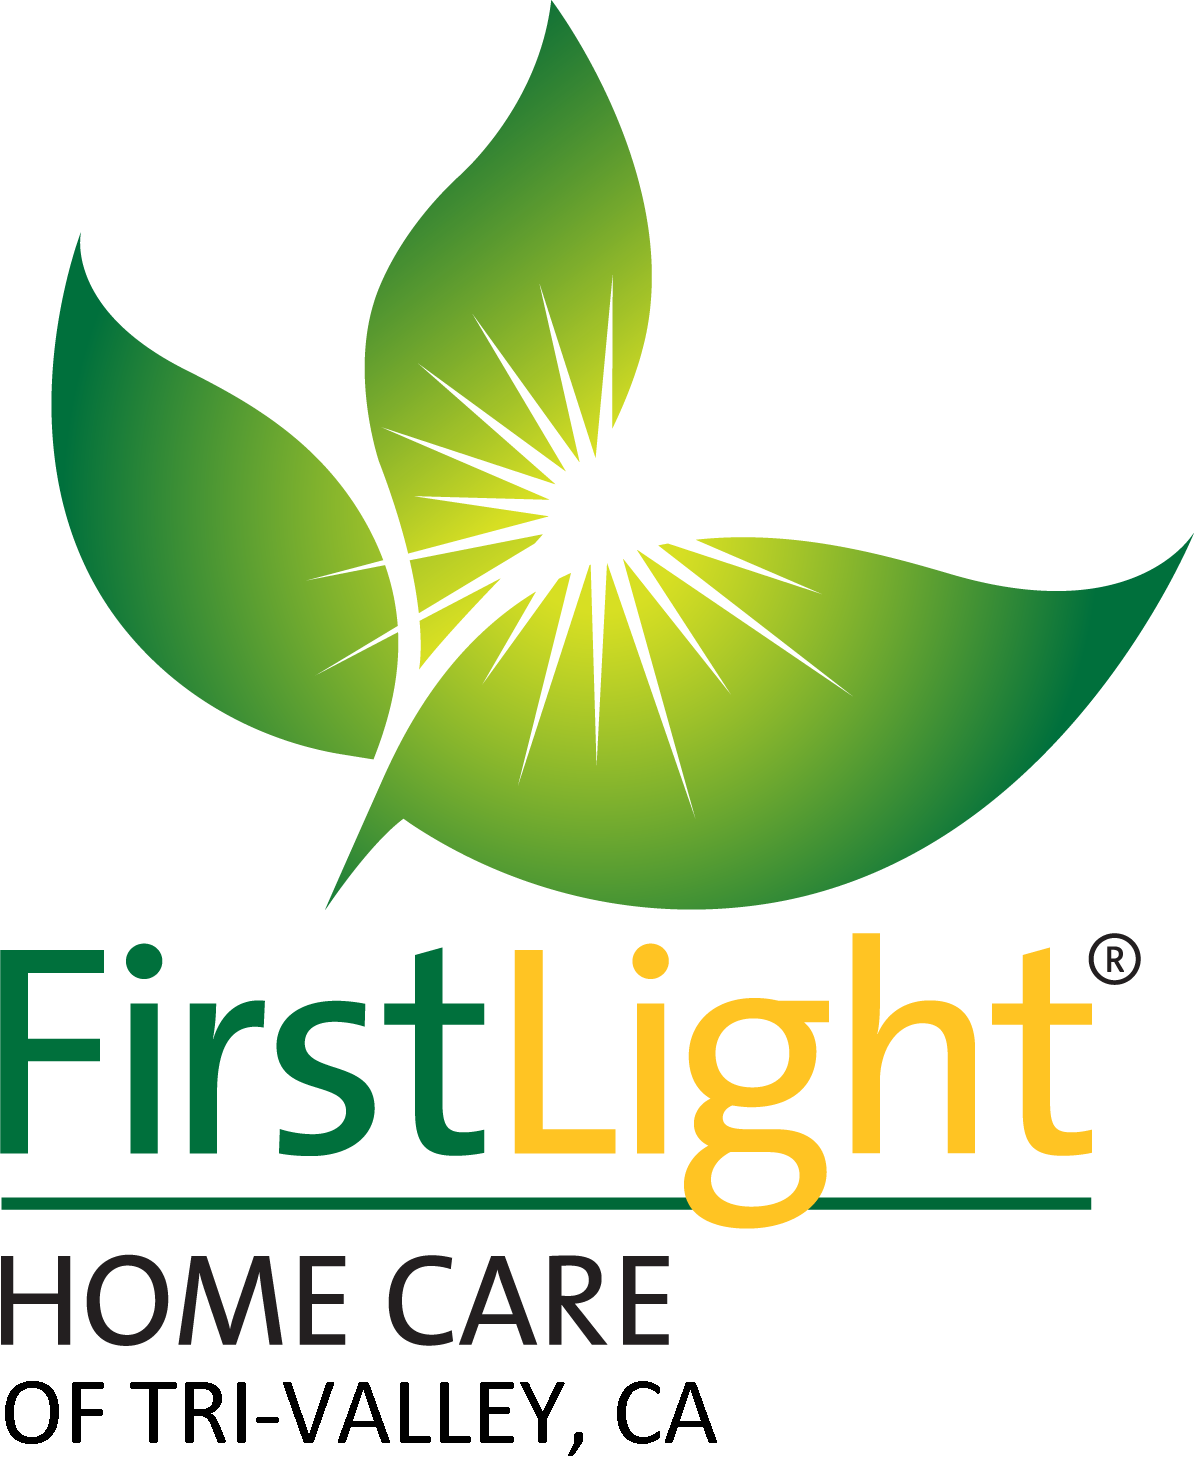 FirstLight Home Care of Tri-Valley, CA